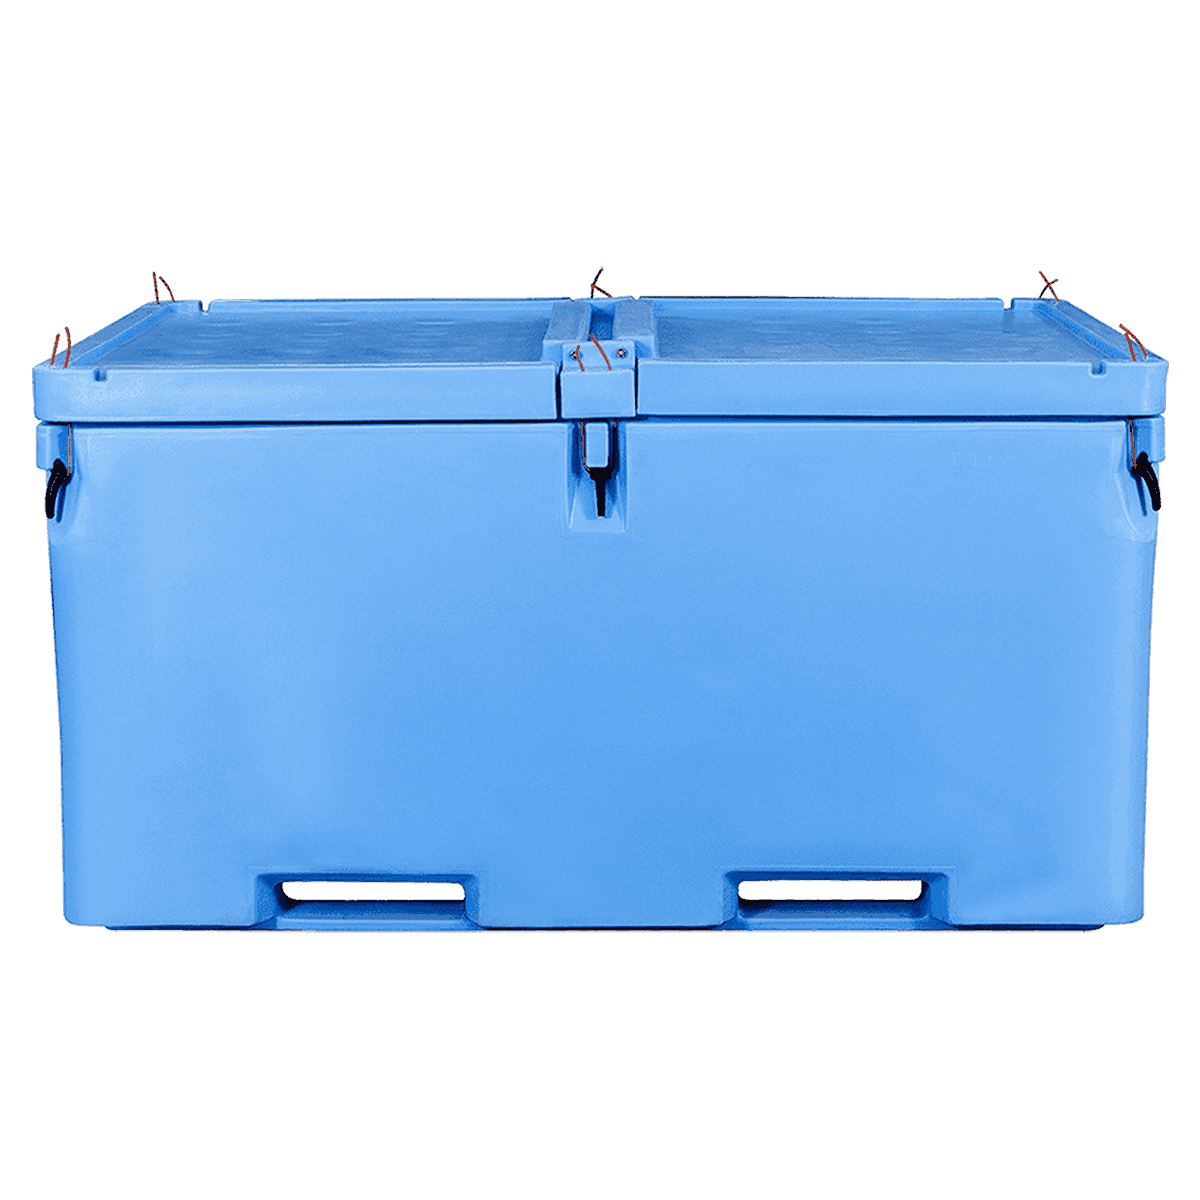 AF-1700L Insulated Bulk Container For Cold-chain Transportation And Production